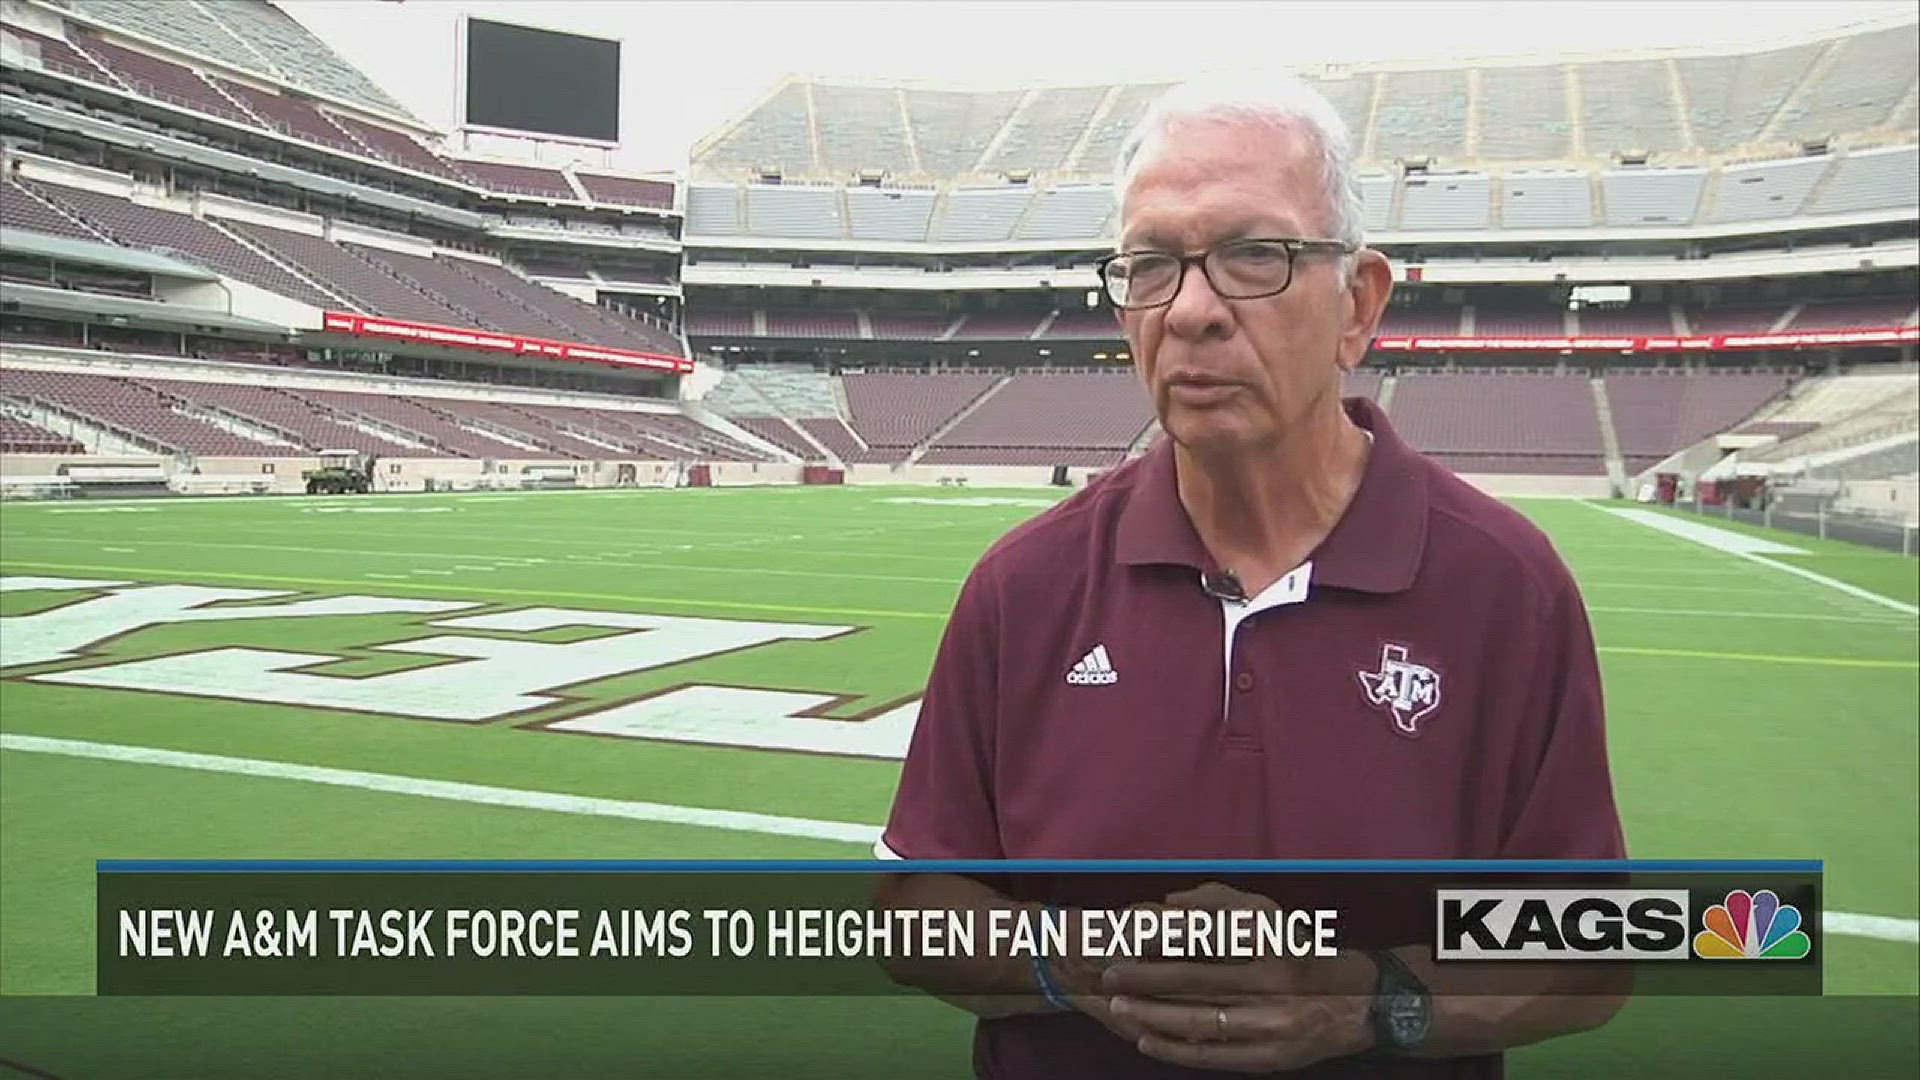 New A&M task force aims to heighten fan experience